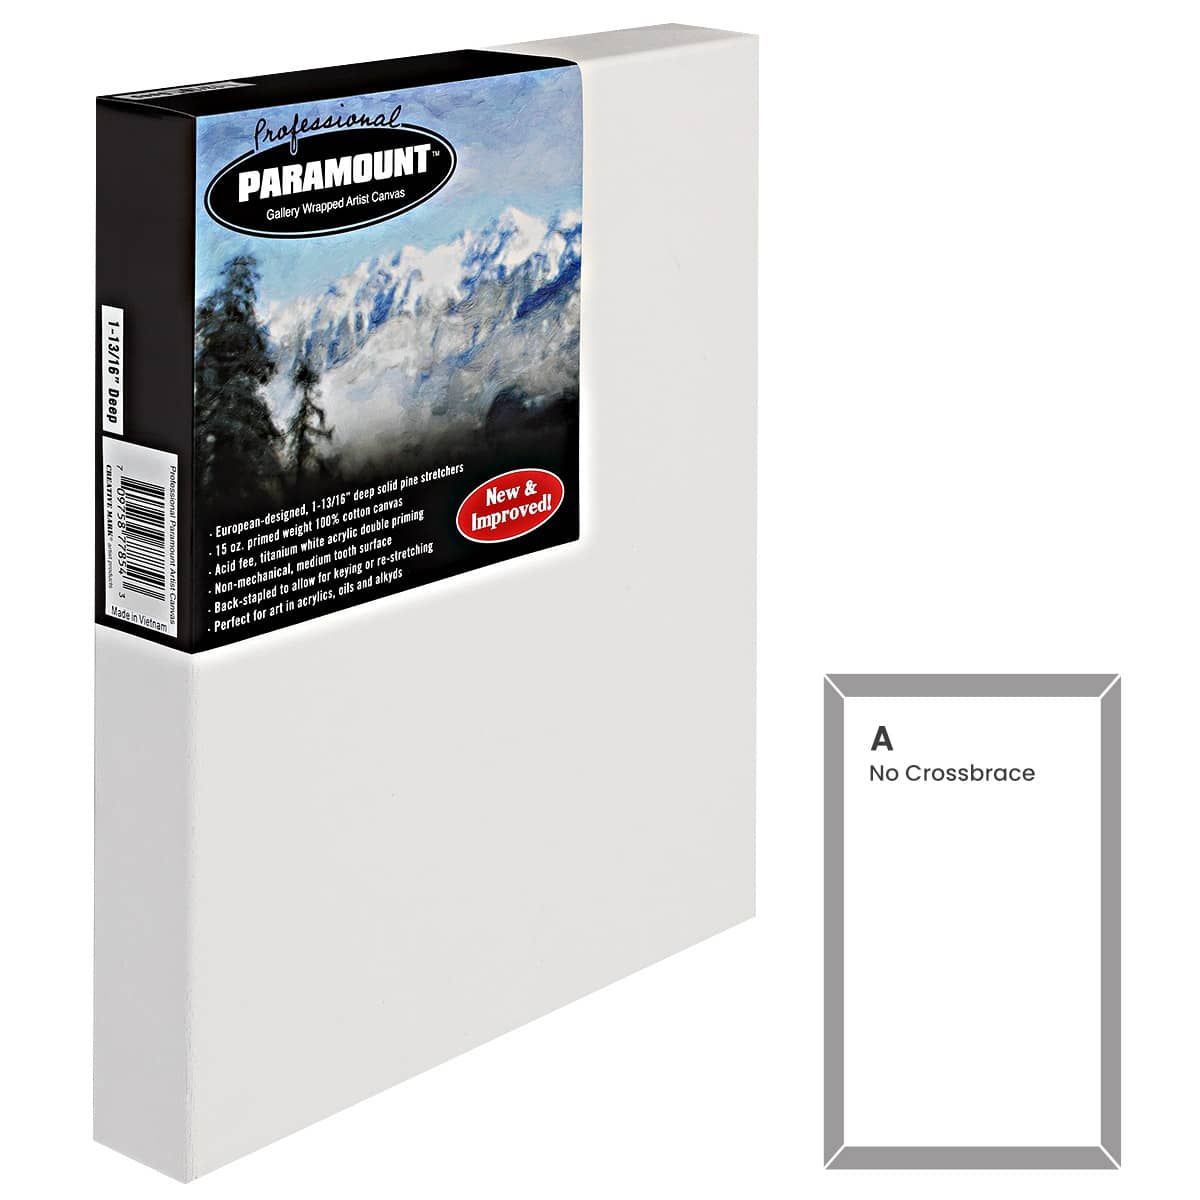 Pre Stretched Canvas 18x24 2 Pack Large Stretched Canvases for